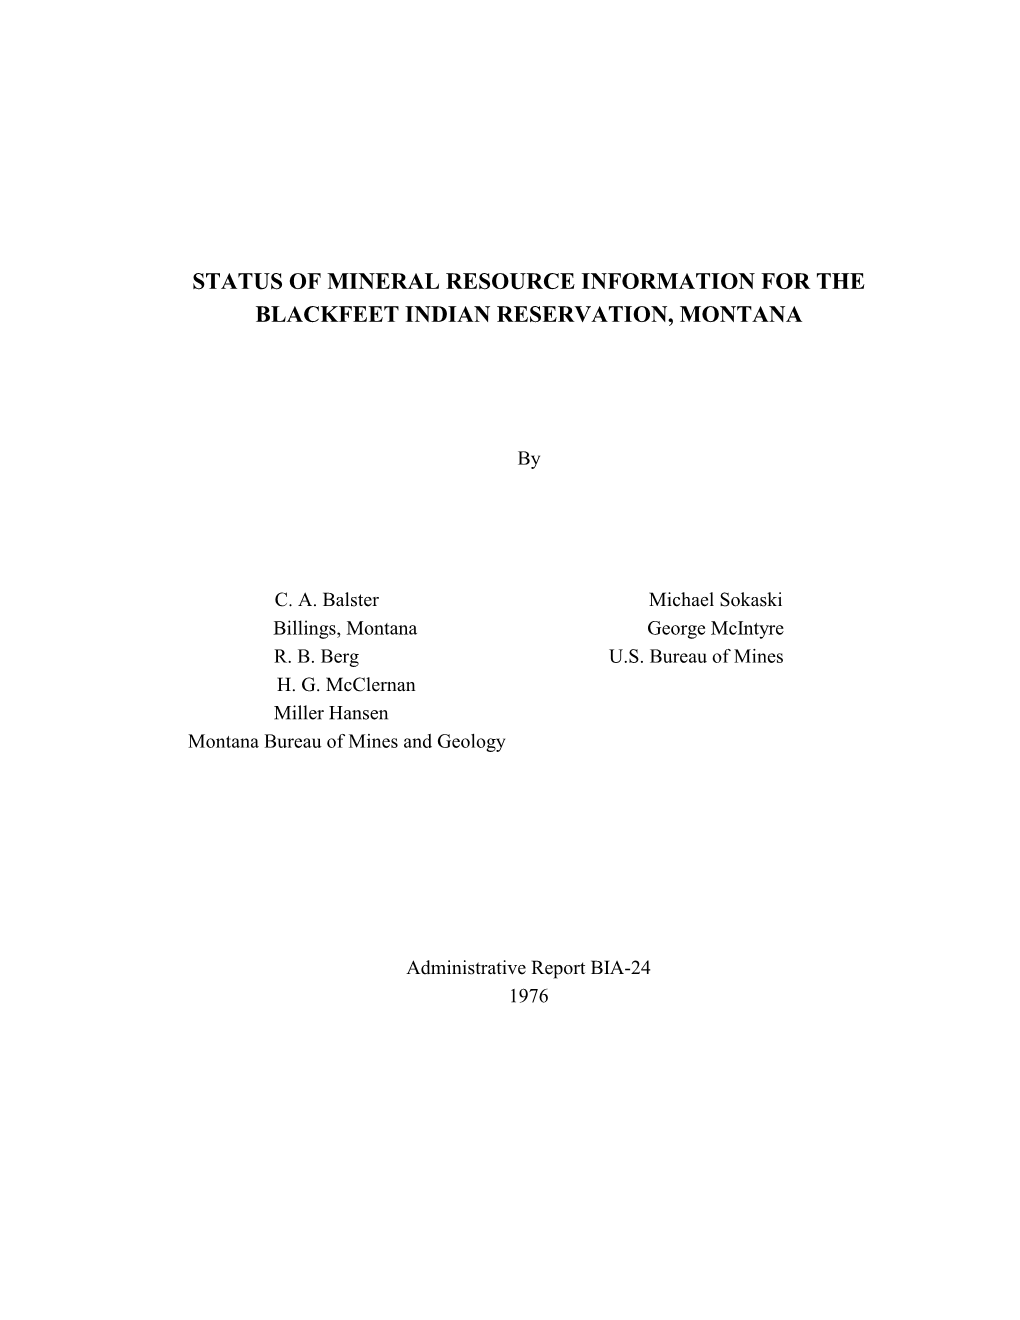 Status of Mineral Resource Information for the Blackfeet Indian Reservation, Montana